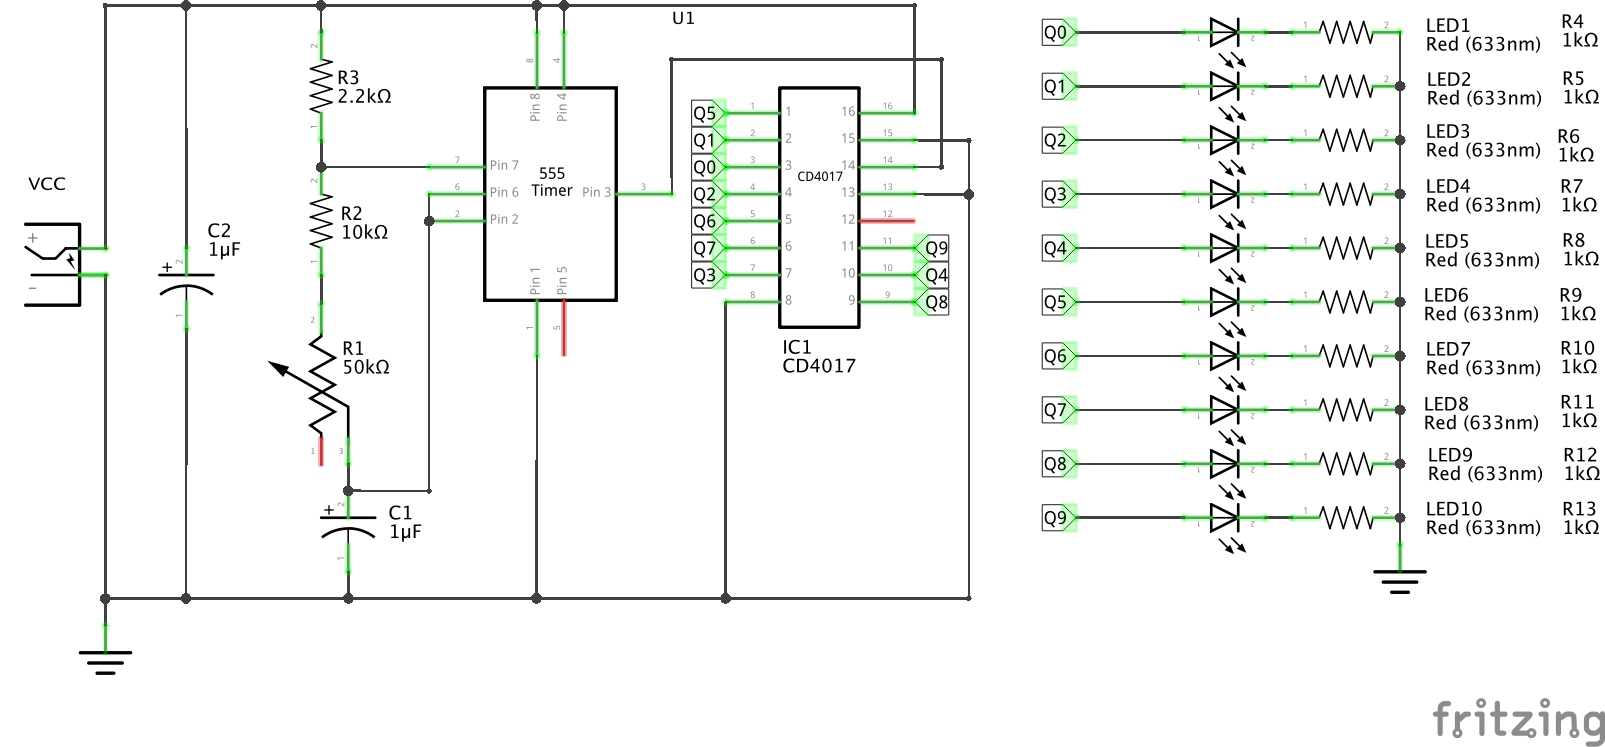 flipflop - How do shift registers work on the gate level? - Electrical  Engineering Stack Exchange